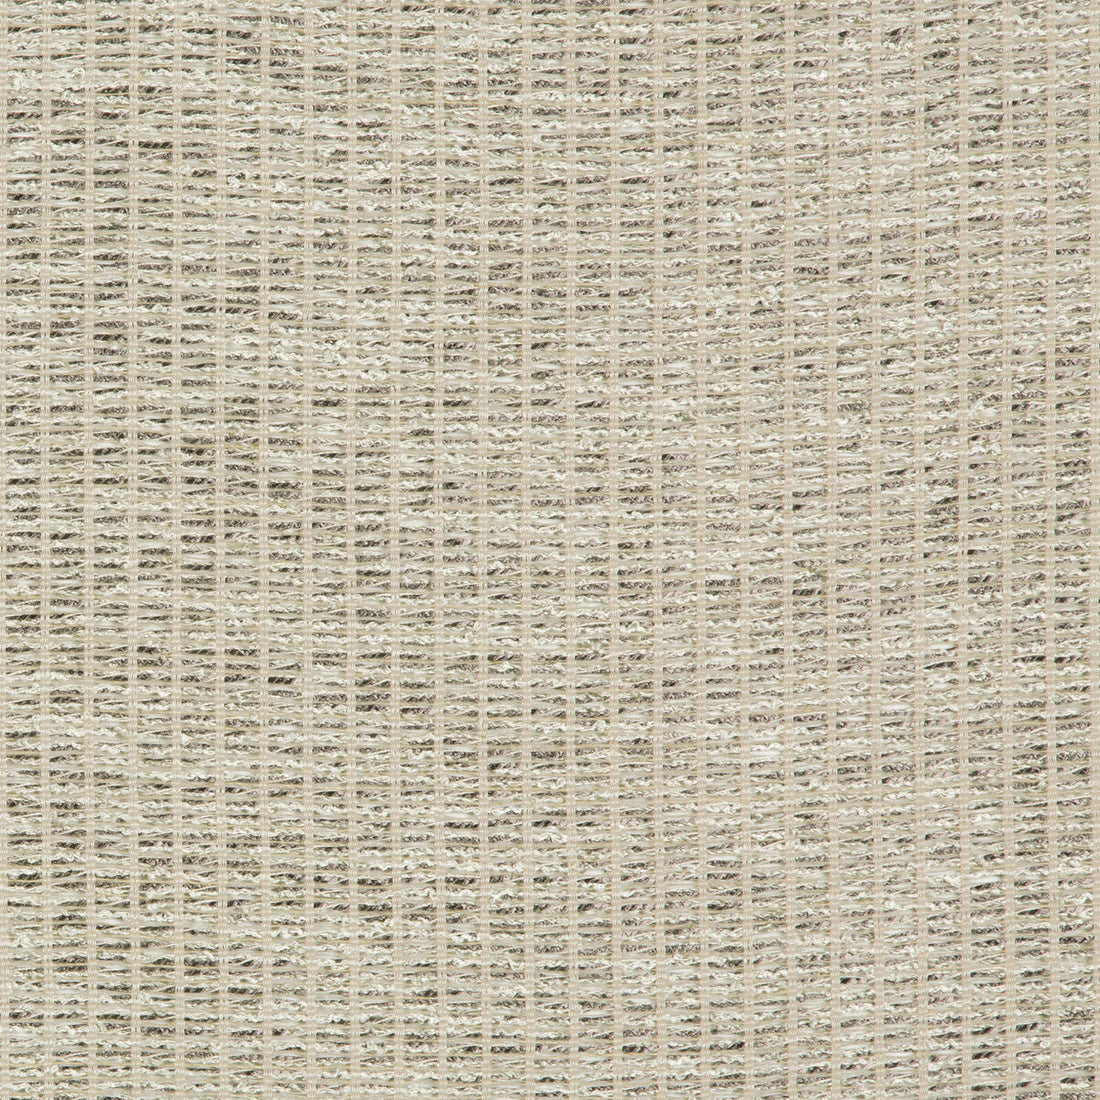 Bejo Sheer fabric in smoke color - pattern 3668.1121.0 - by Kravet Couture in the Calvin Klein Home collection